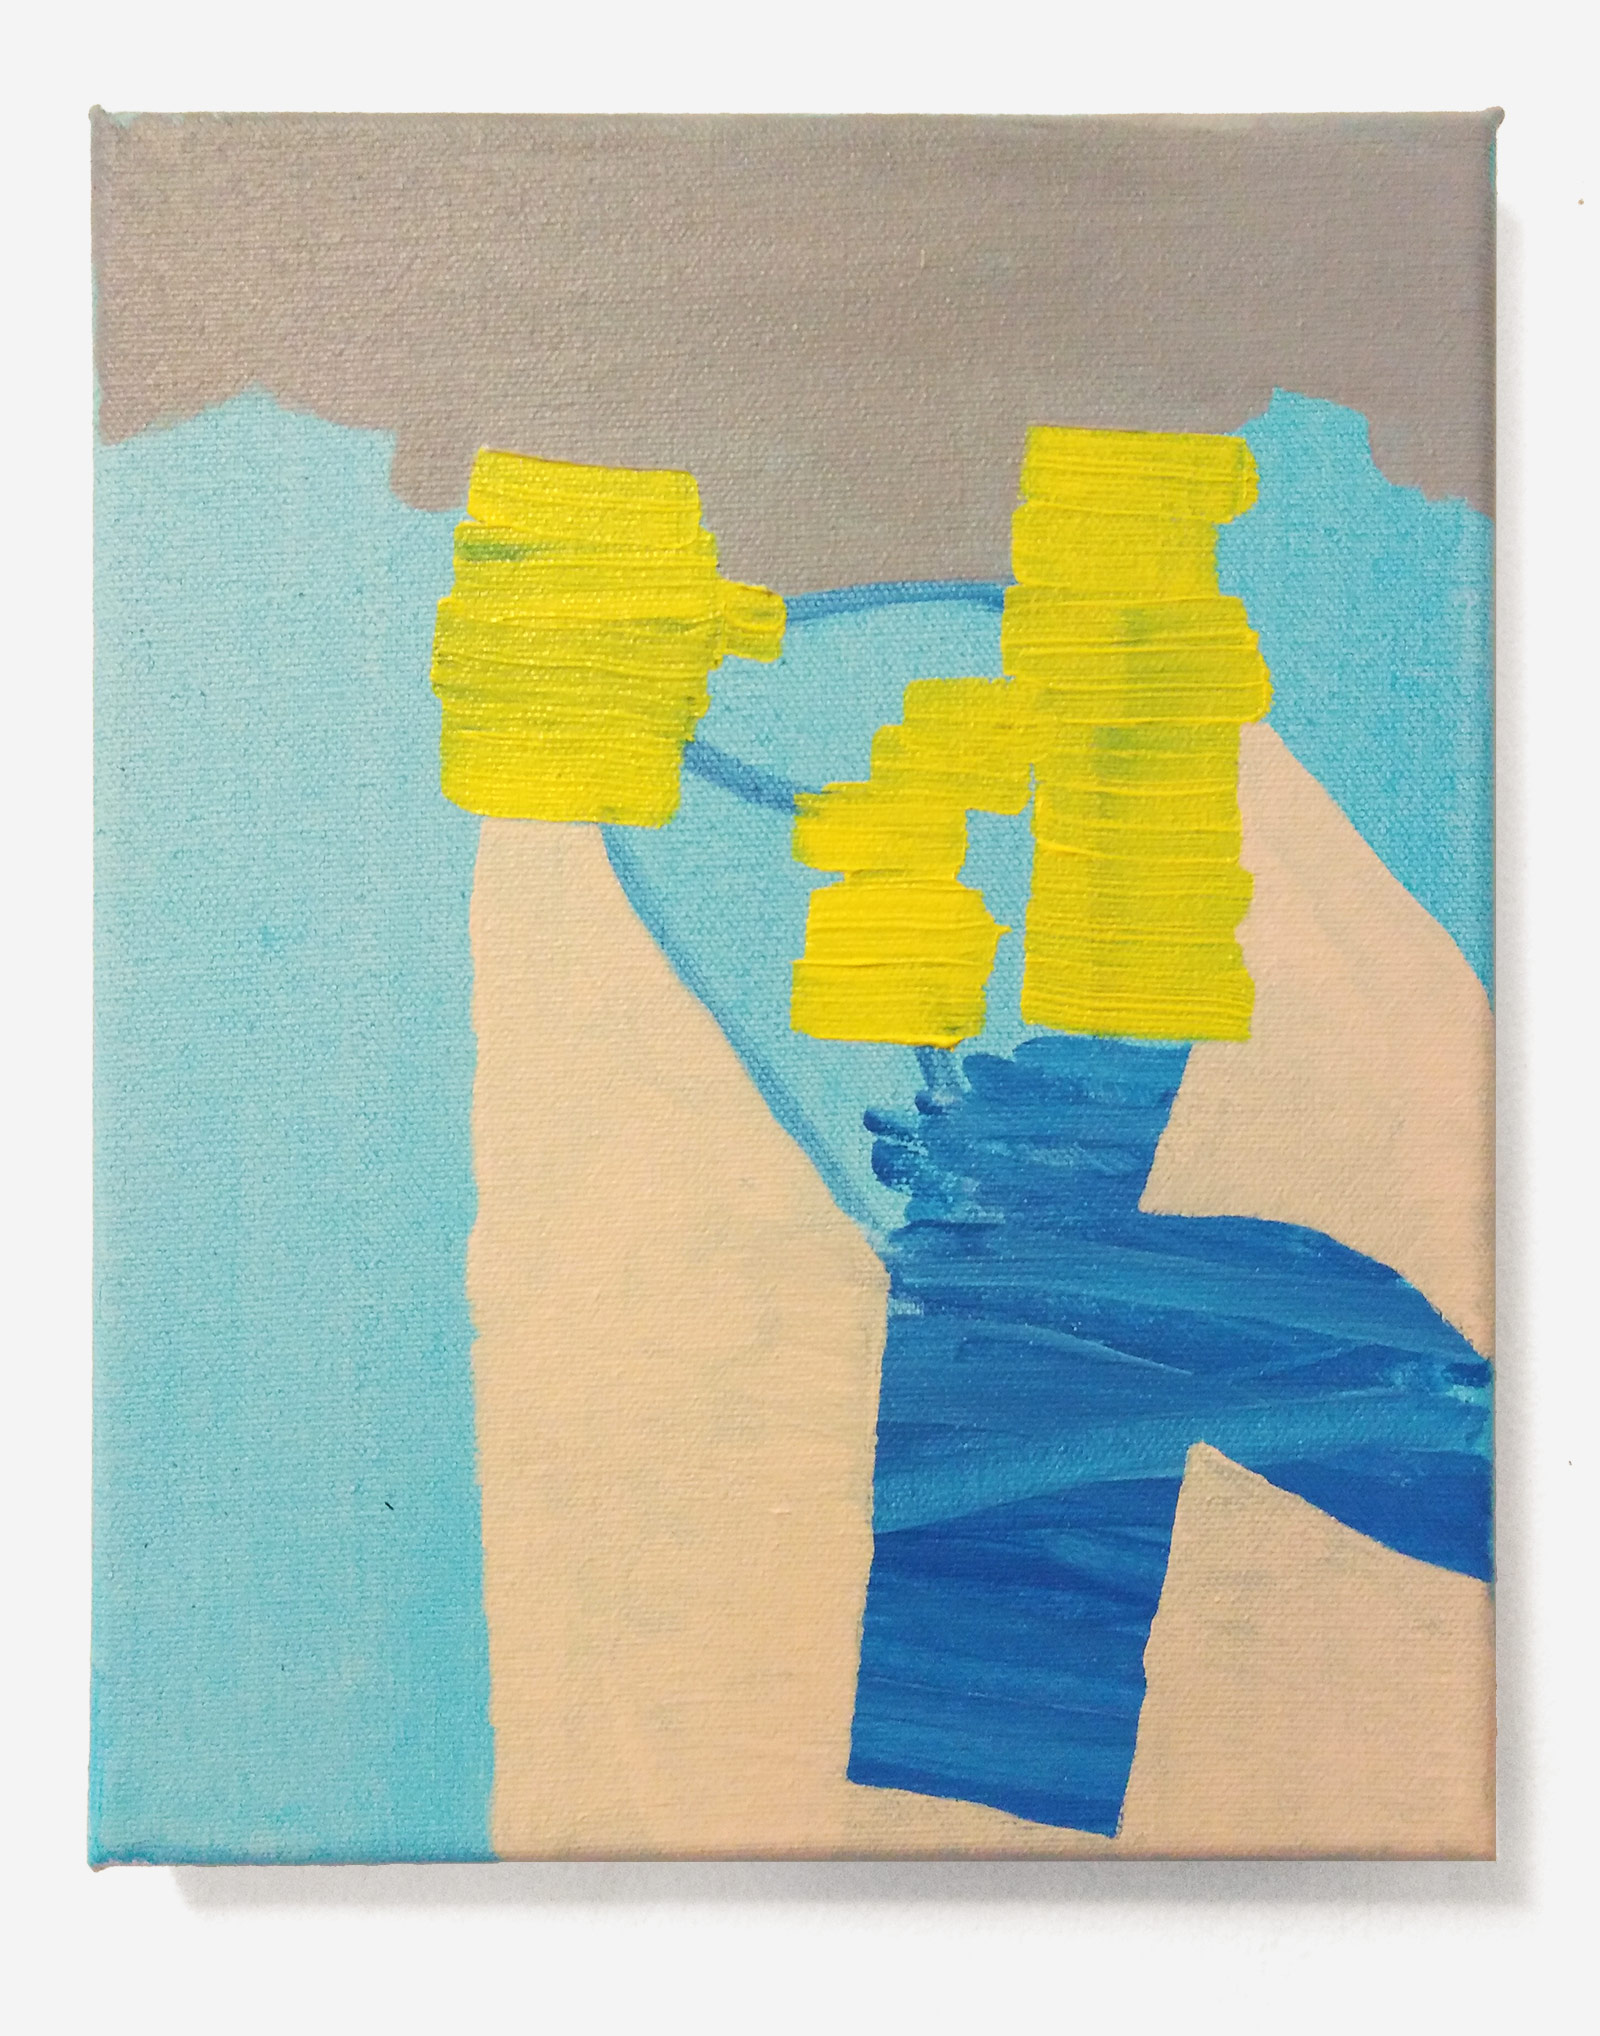 Work in progress, small canvas with abstract blue, pale orange, yellow and grey forms. Gary Peters.